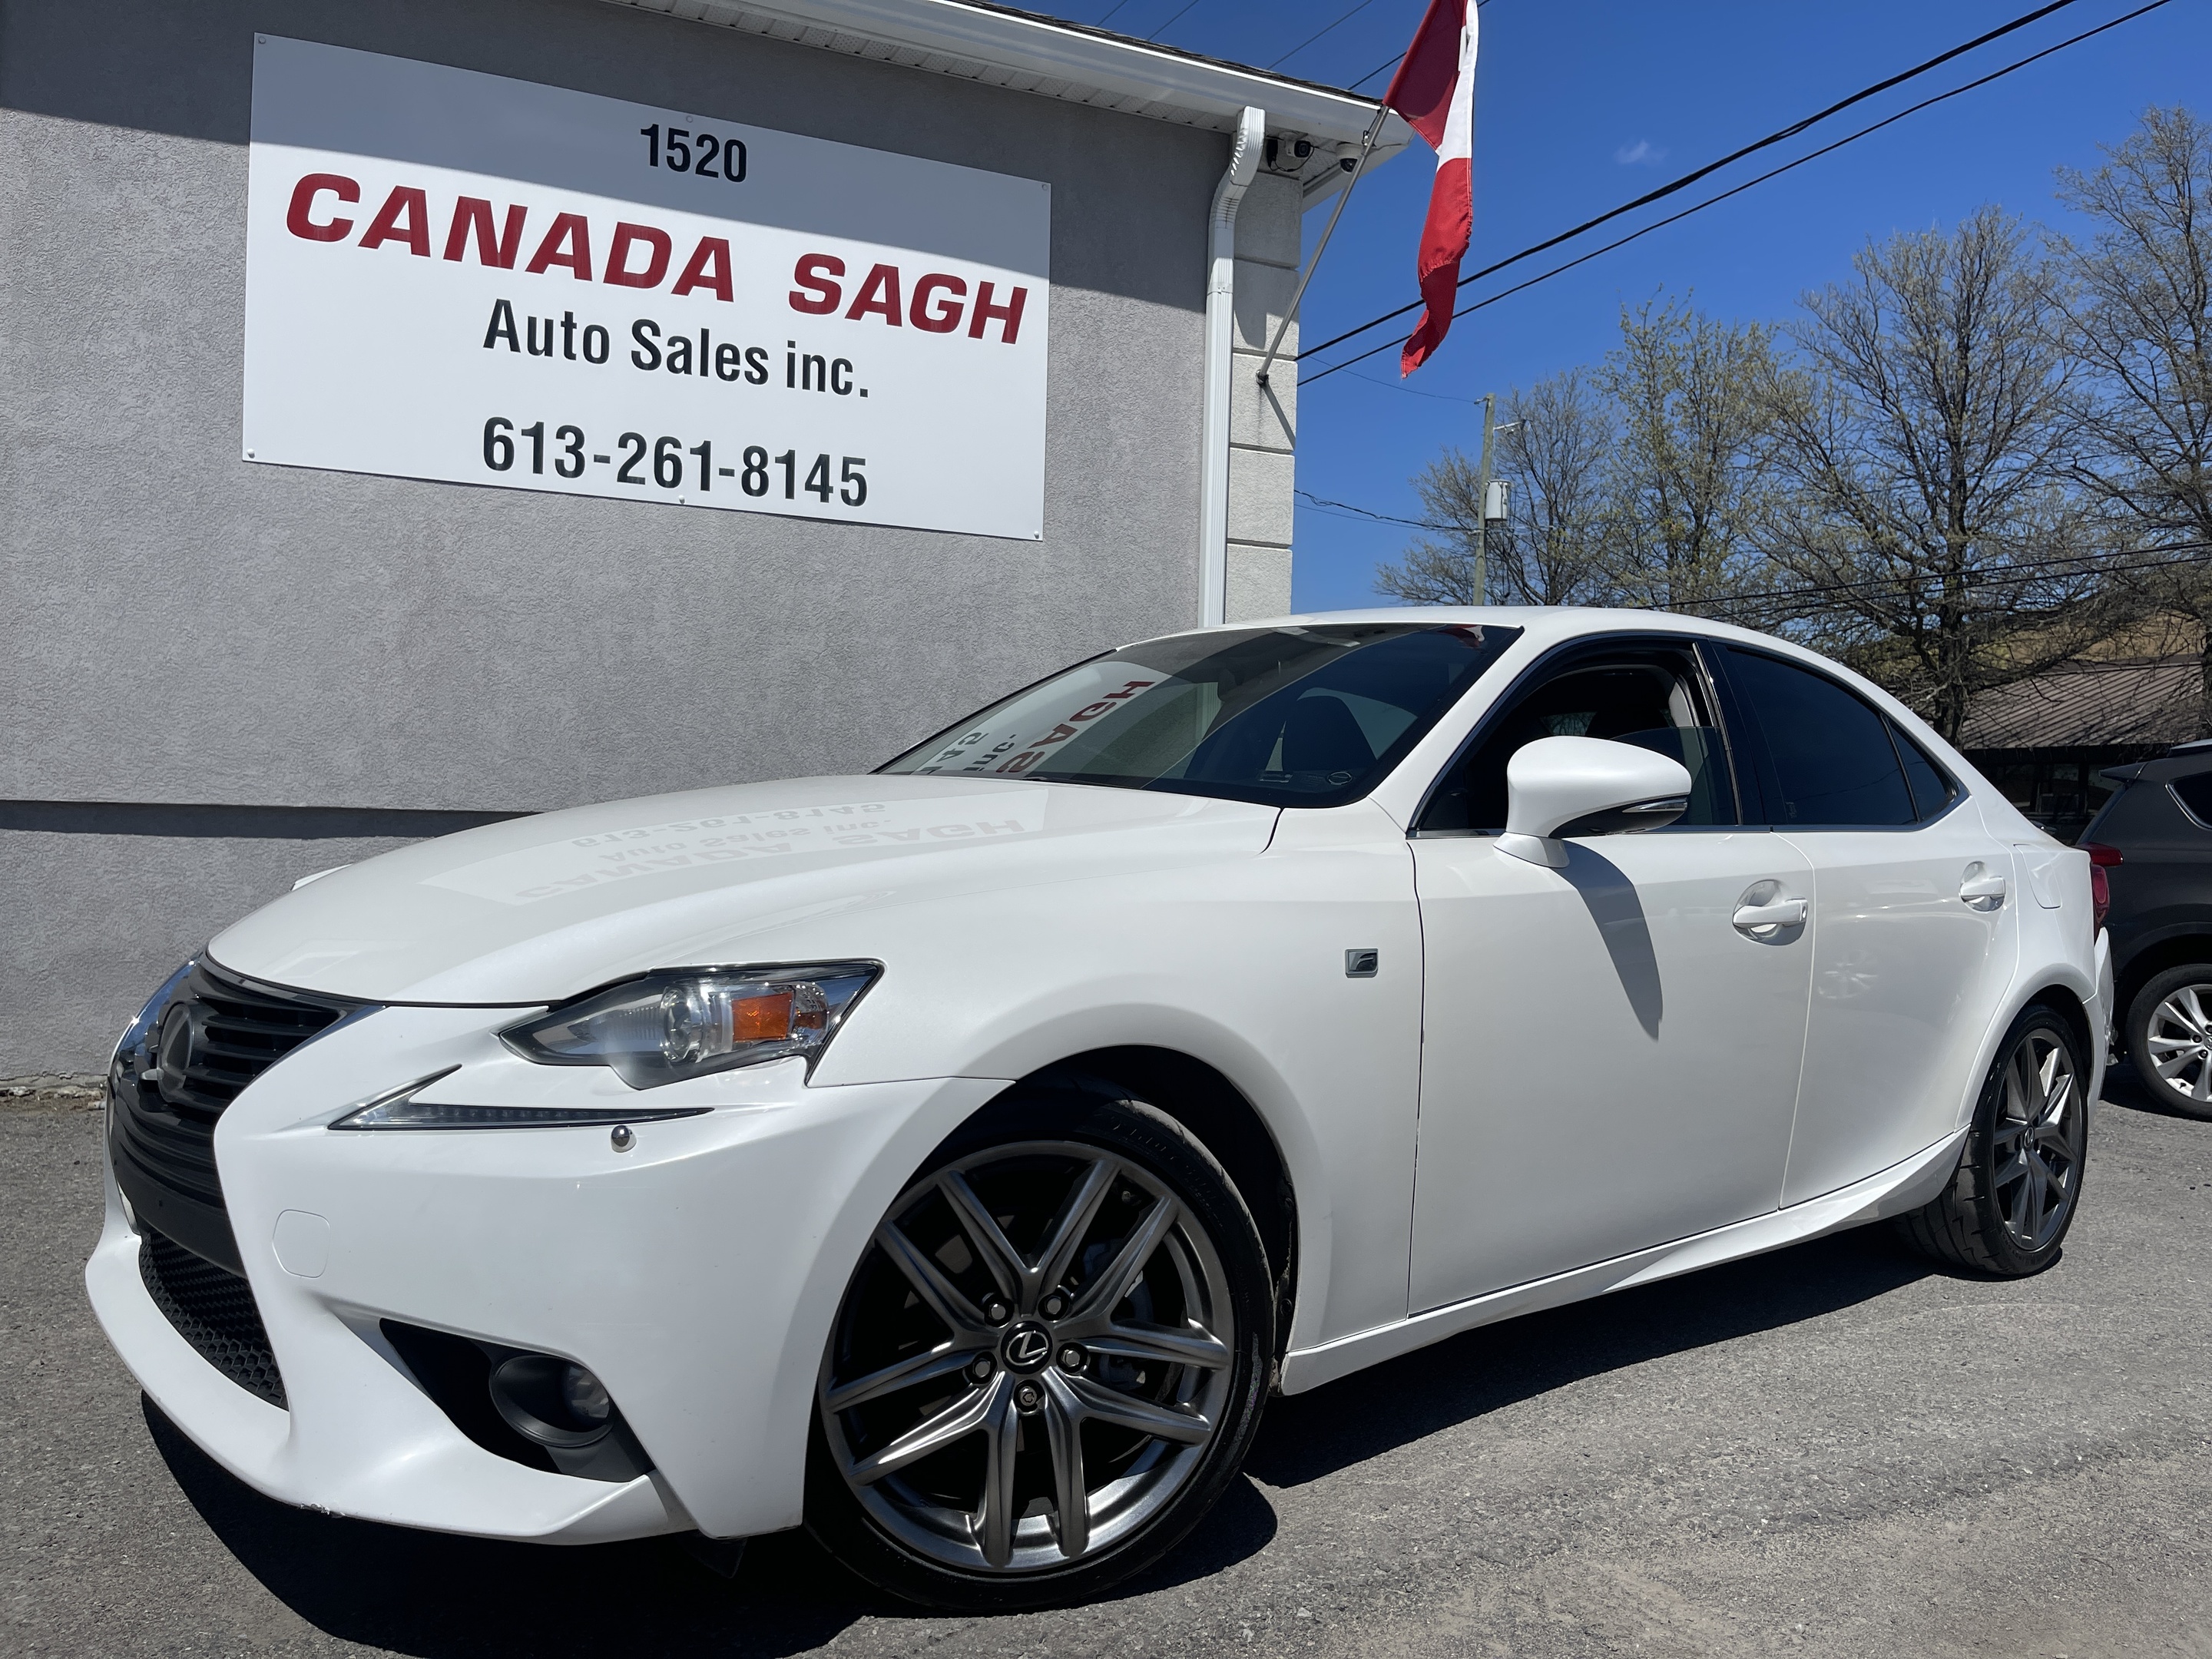 2015 Lexus IS 250 AWD/NEWTIRES/89K/12 M WRTY+SAFETY